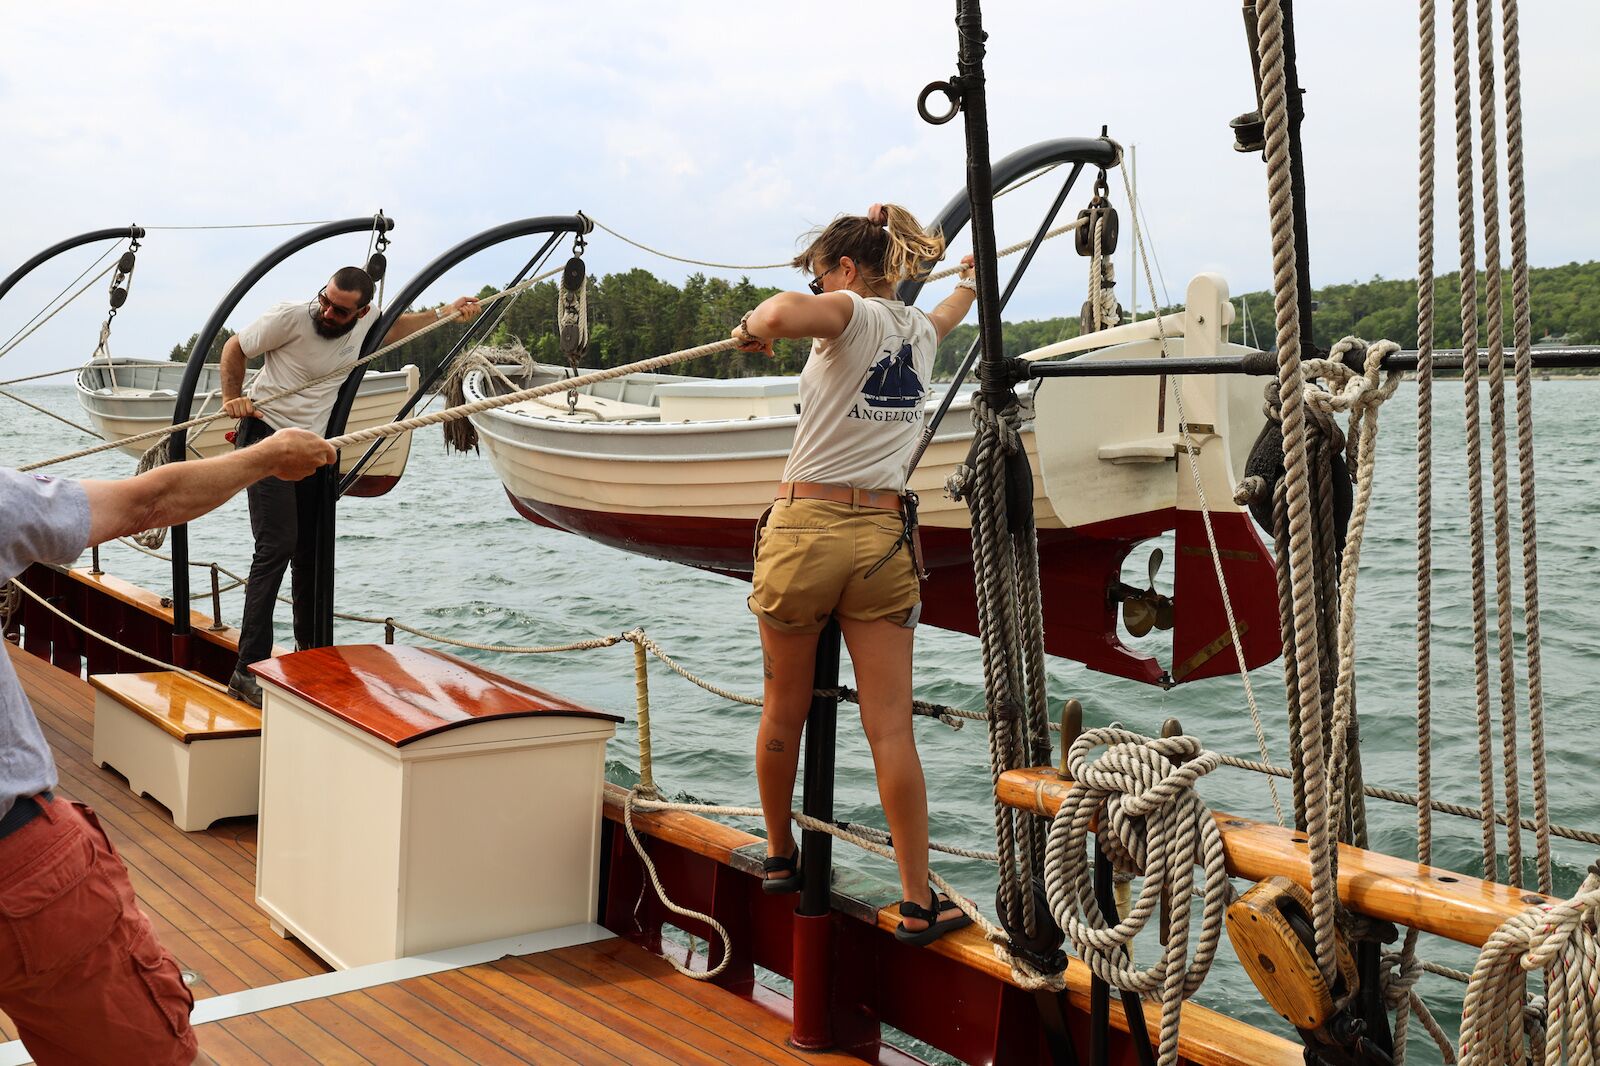 Crew members lower a boat in the water during a windjammer cruise in Maine